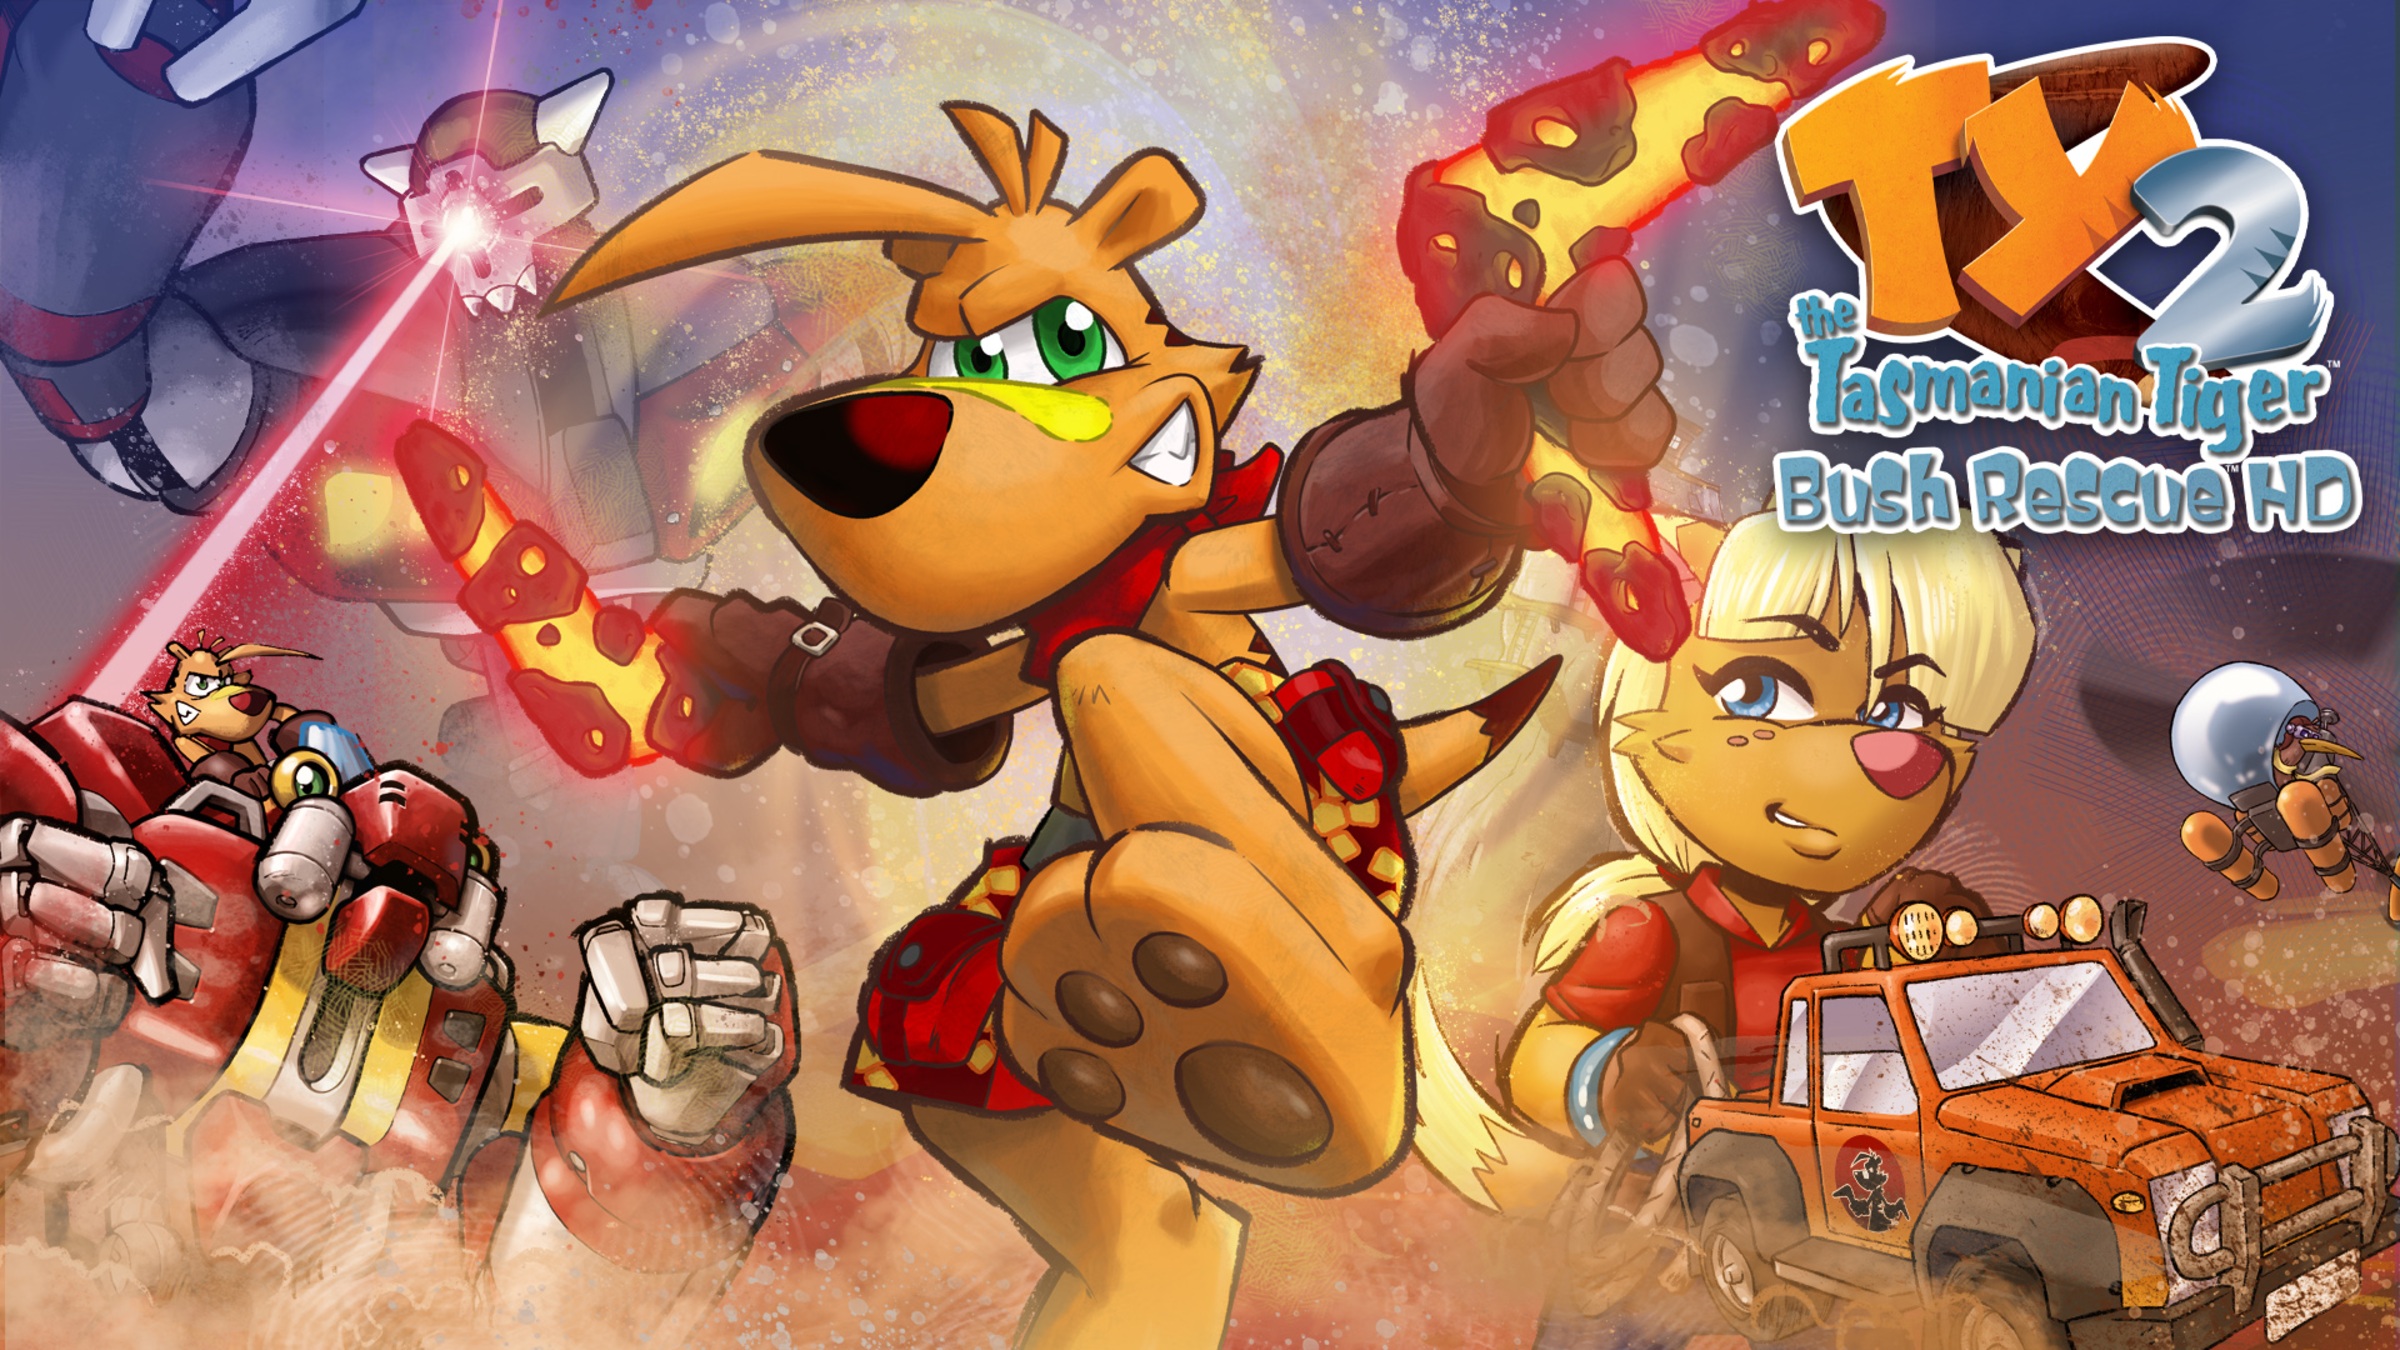 TY the Tasmanian Tiger™ HD for Nintendo Switch - Nintendo Official Site